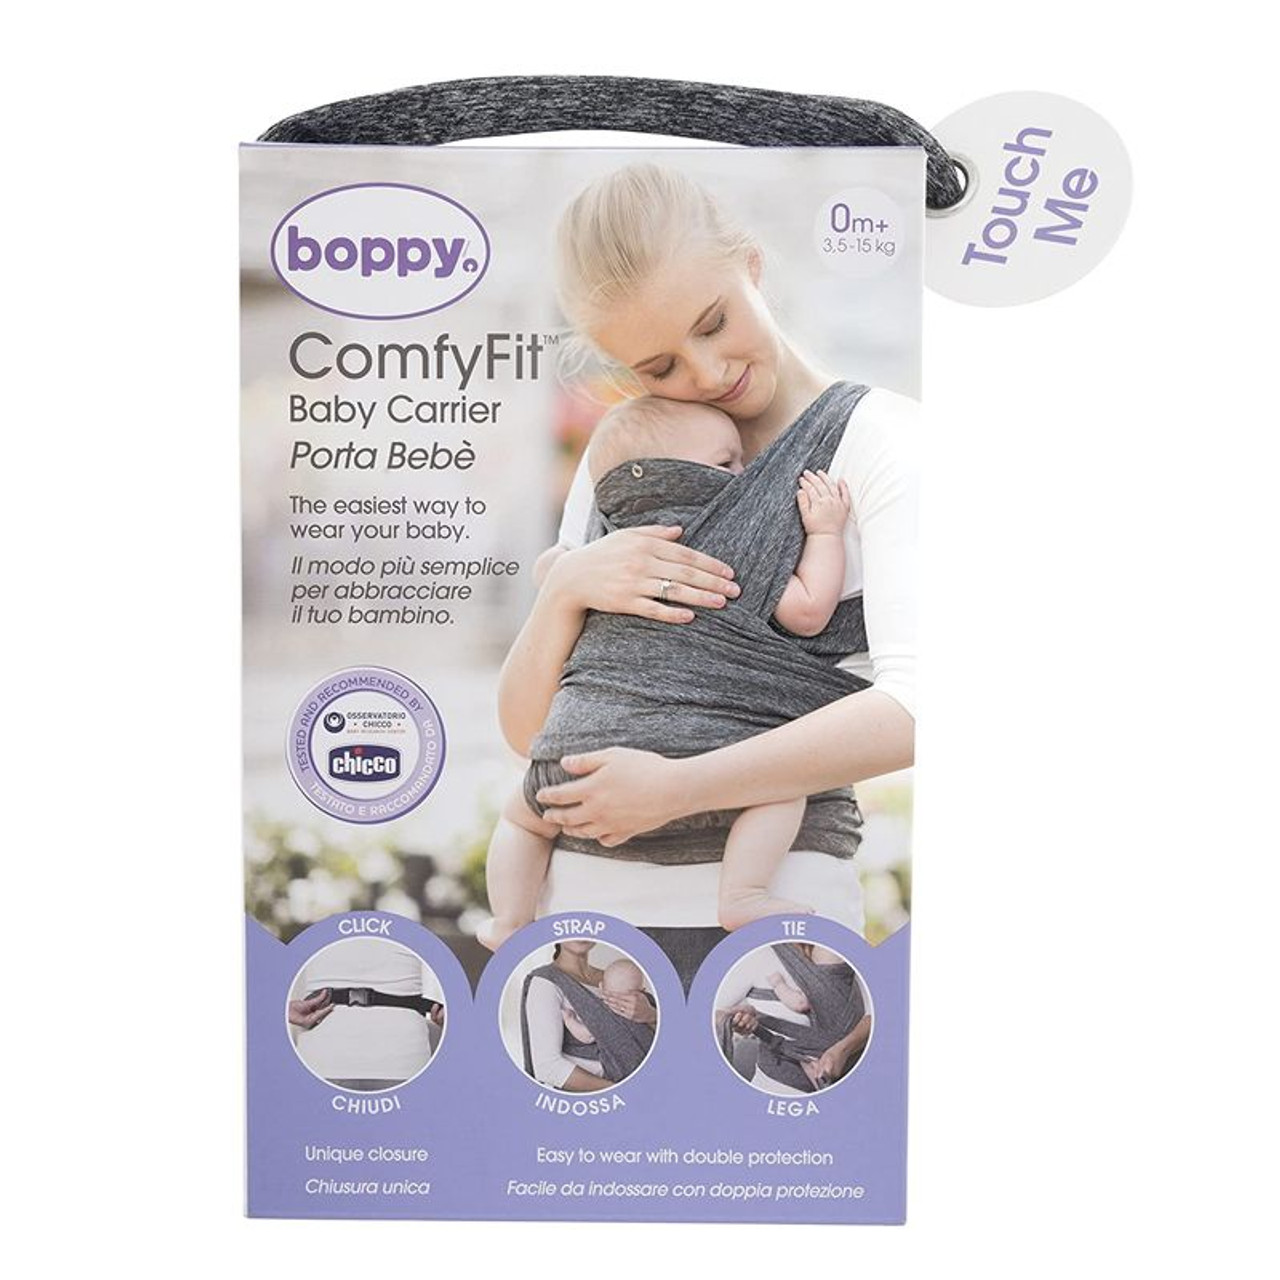 comfy fit baby carrier boppy